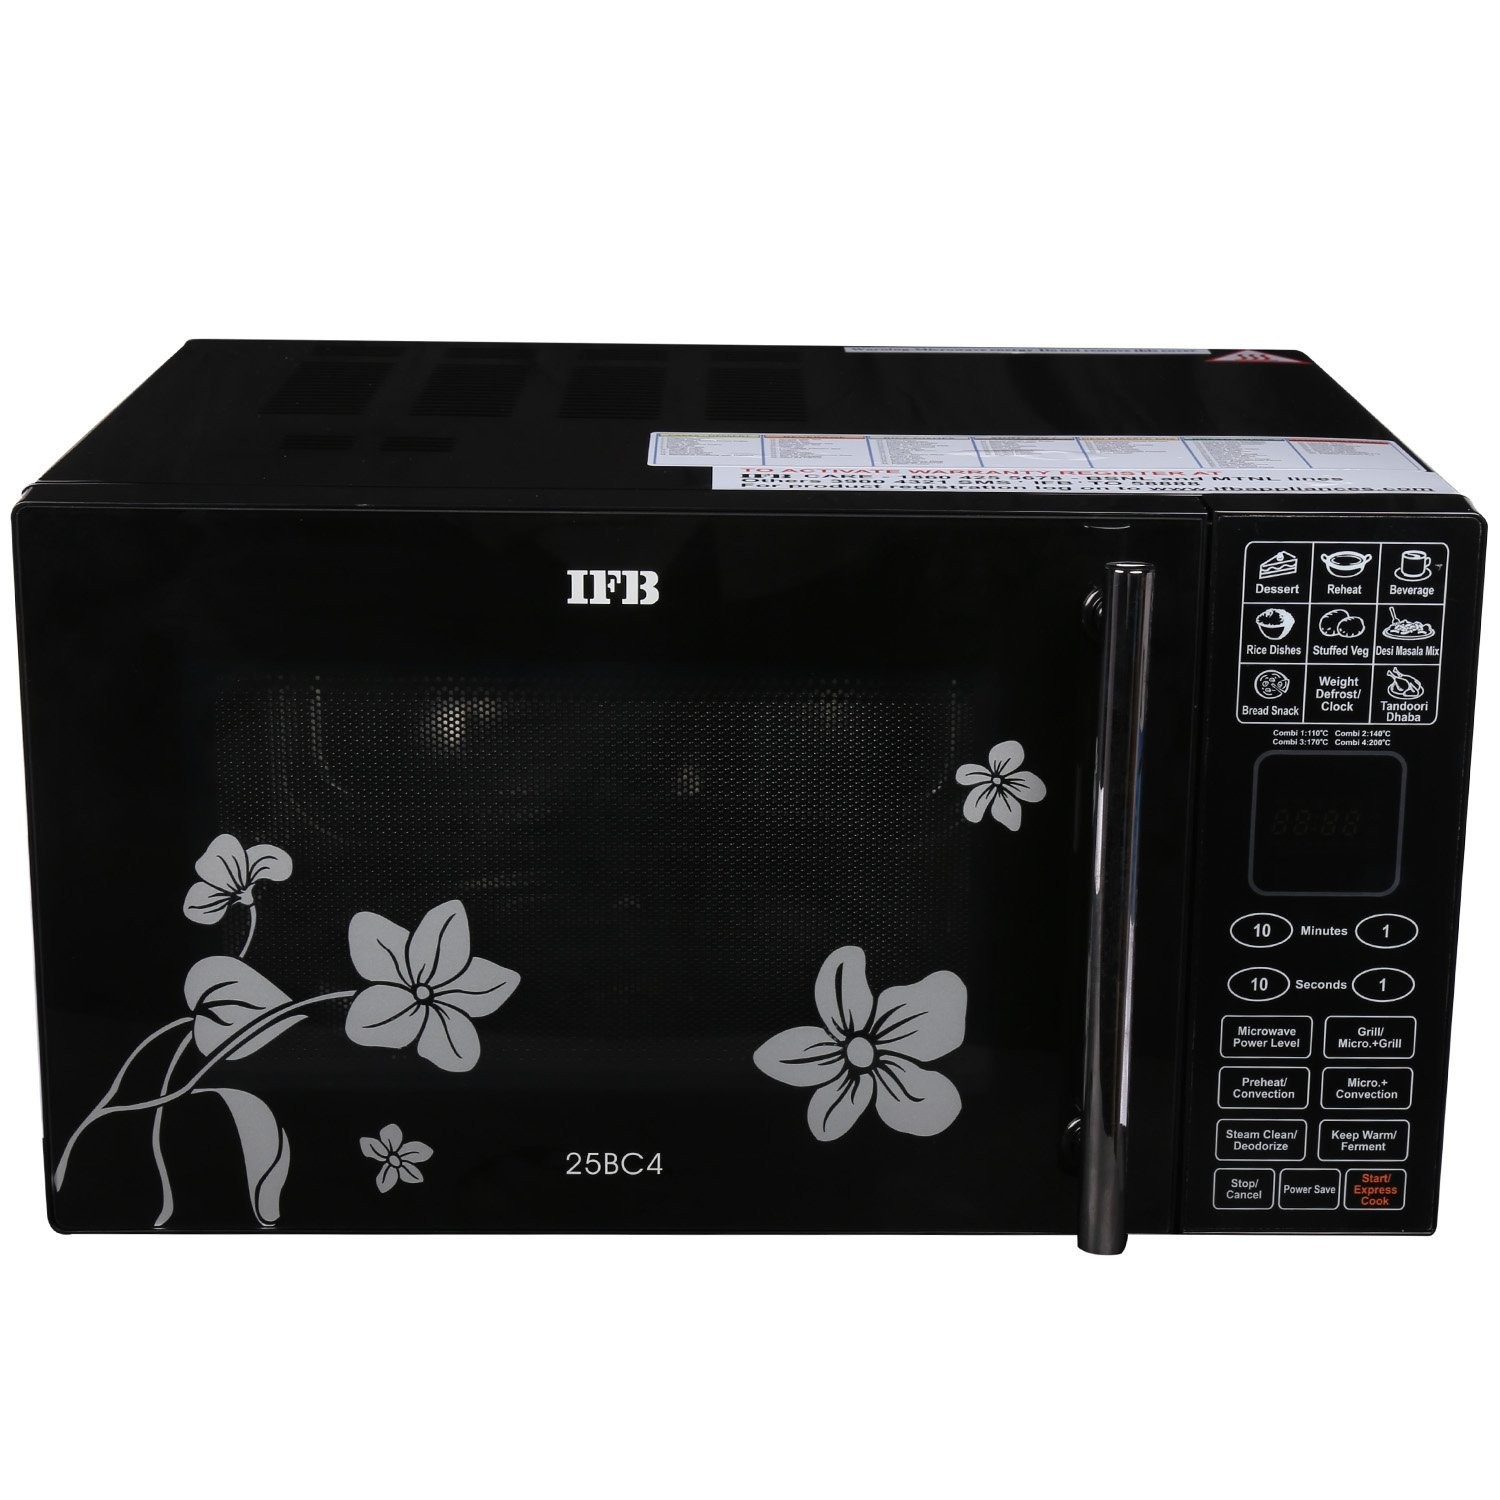 IFB Microwave Oven 25BC4